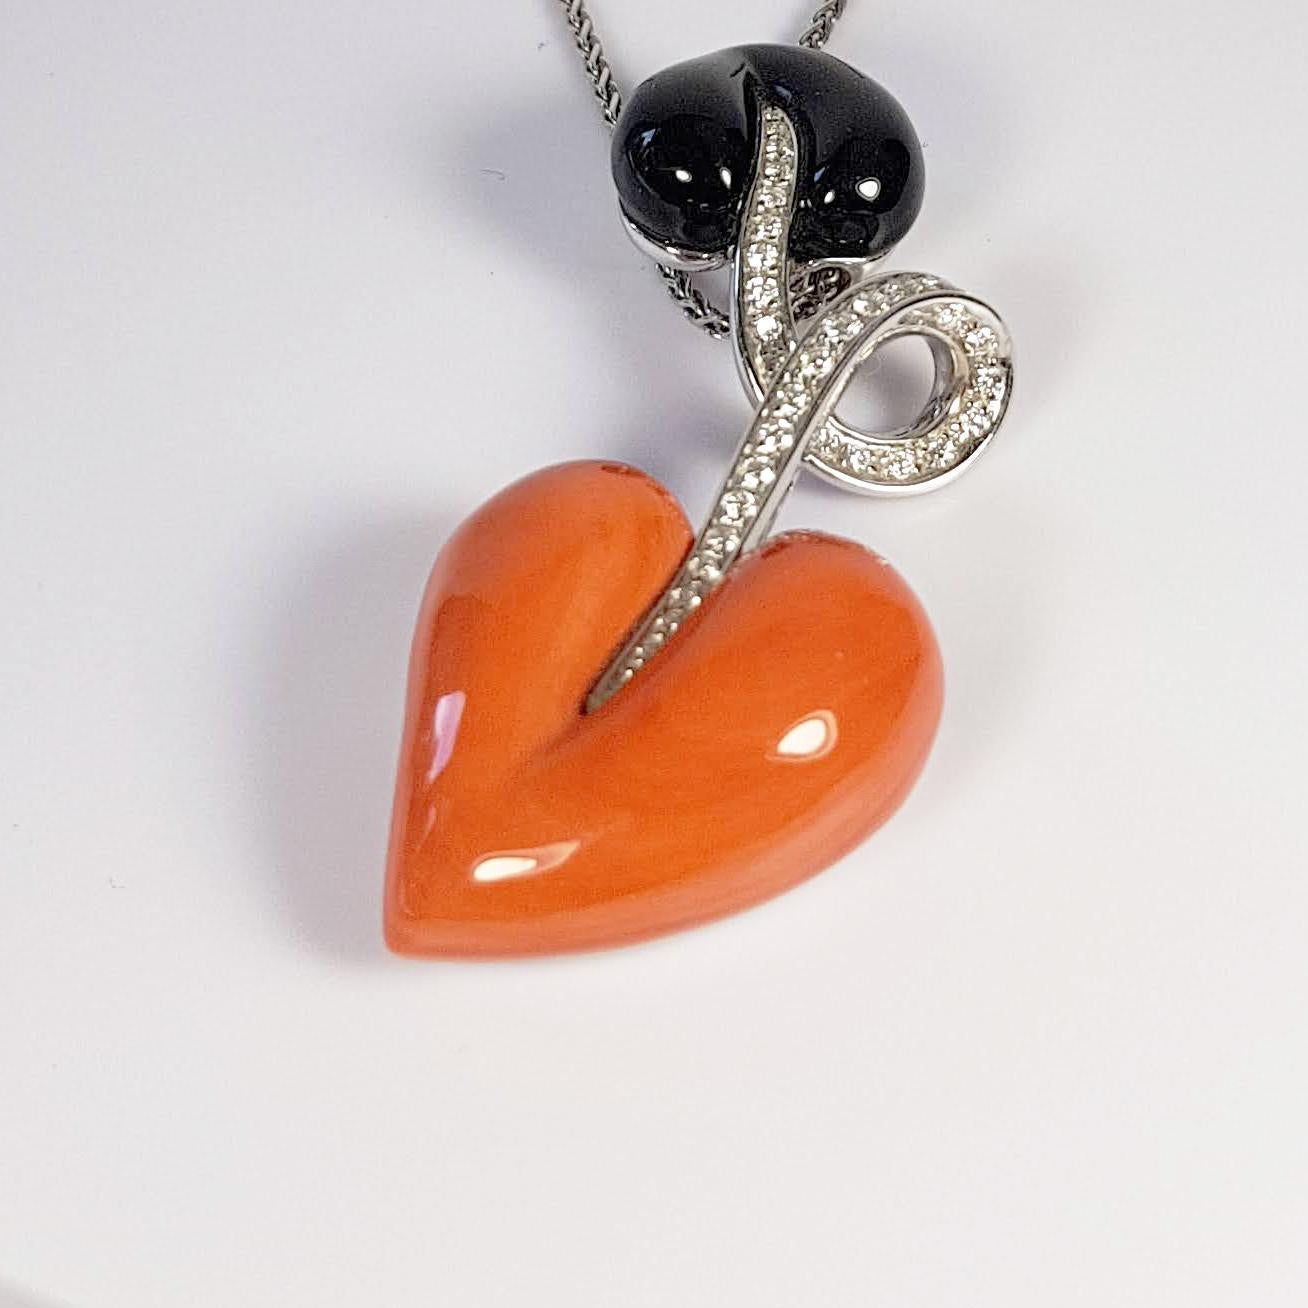 Beautiful pendant necklace in 18K white gold with and brilliant-cut diamonds creative motifs in red coral from the Mediterranean and onyx.
Signed Grazia Gioielli Italy. Very consistant and curvy smooth gold feeling.

READY TO SHIP
*Shipment of this